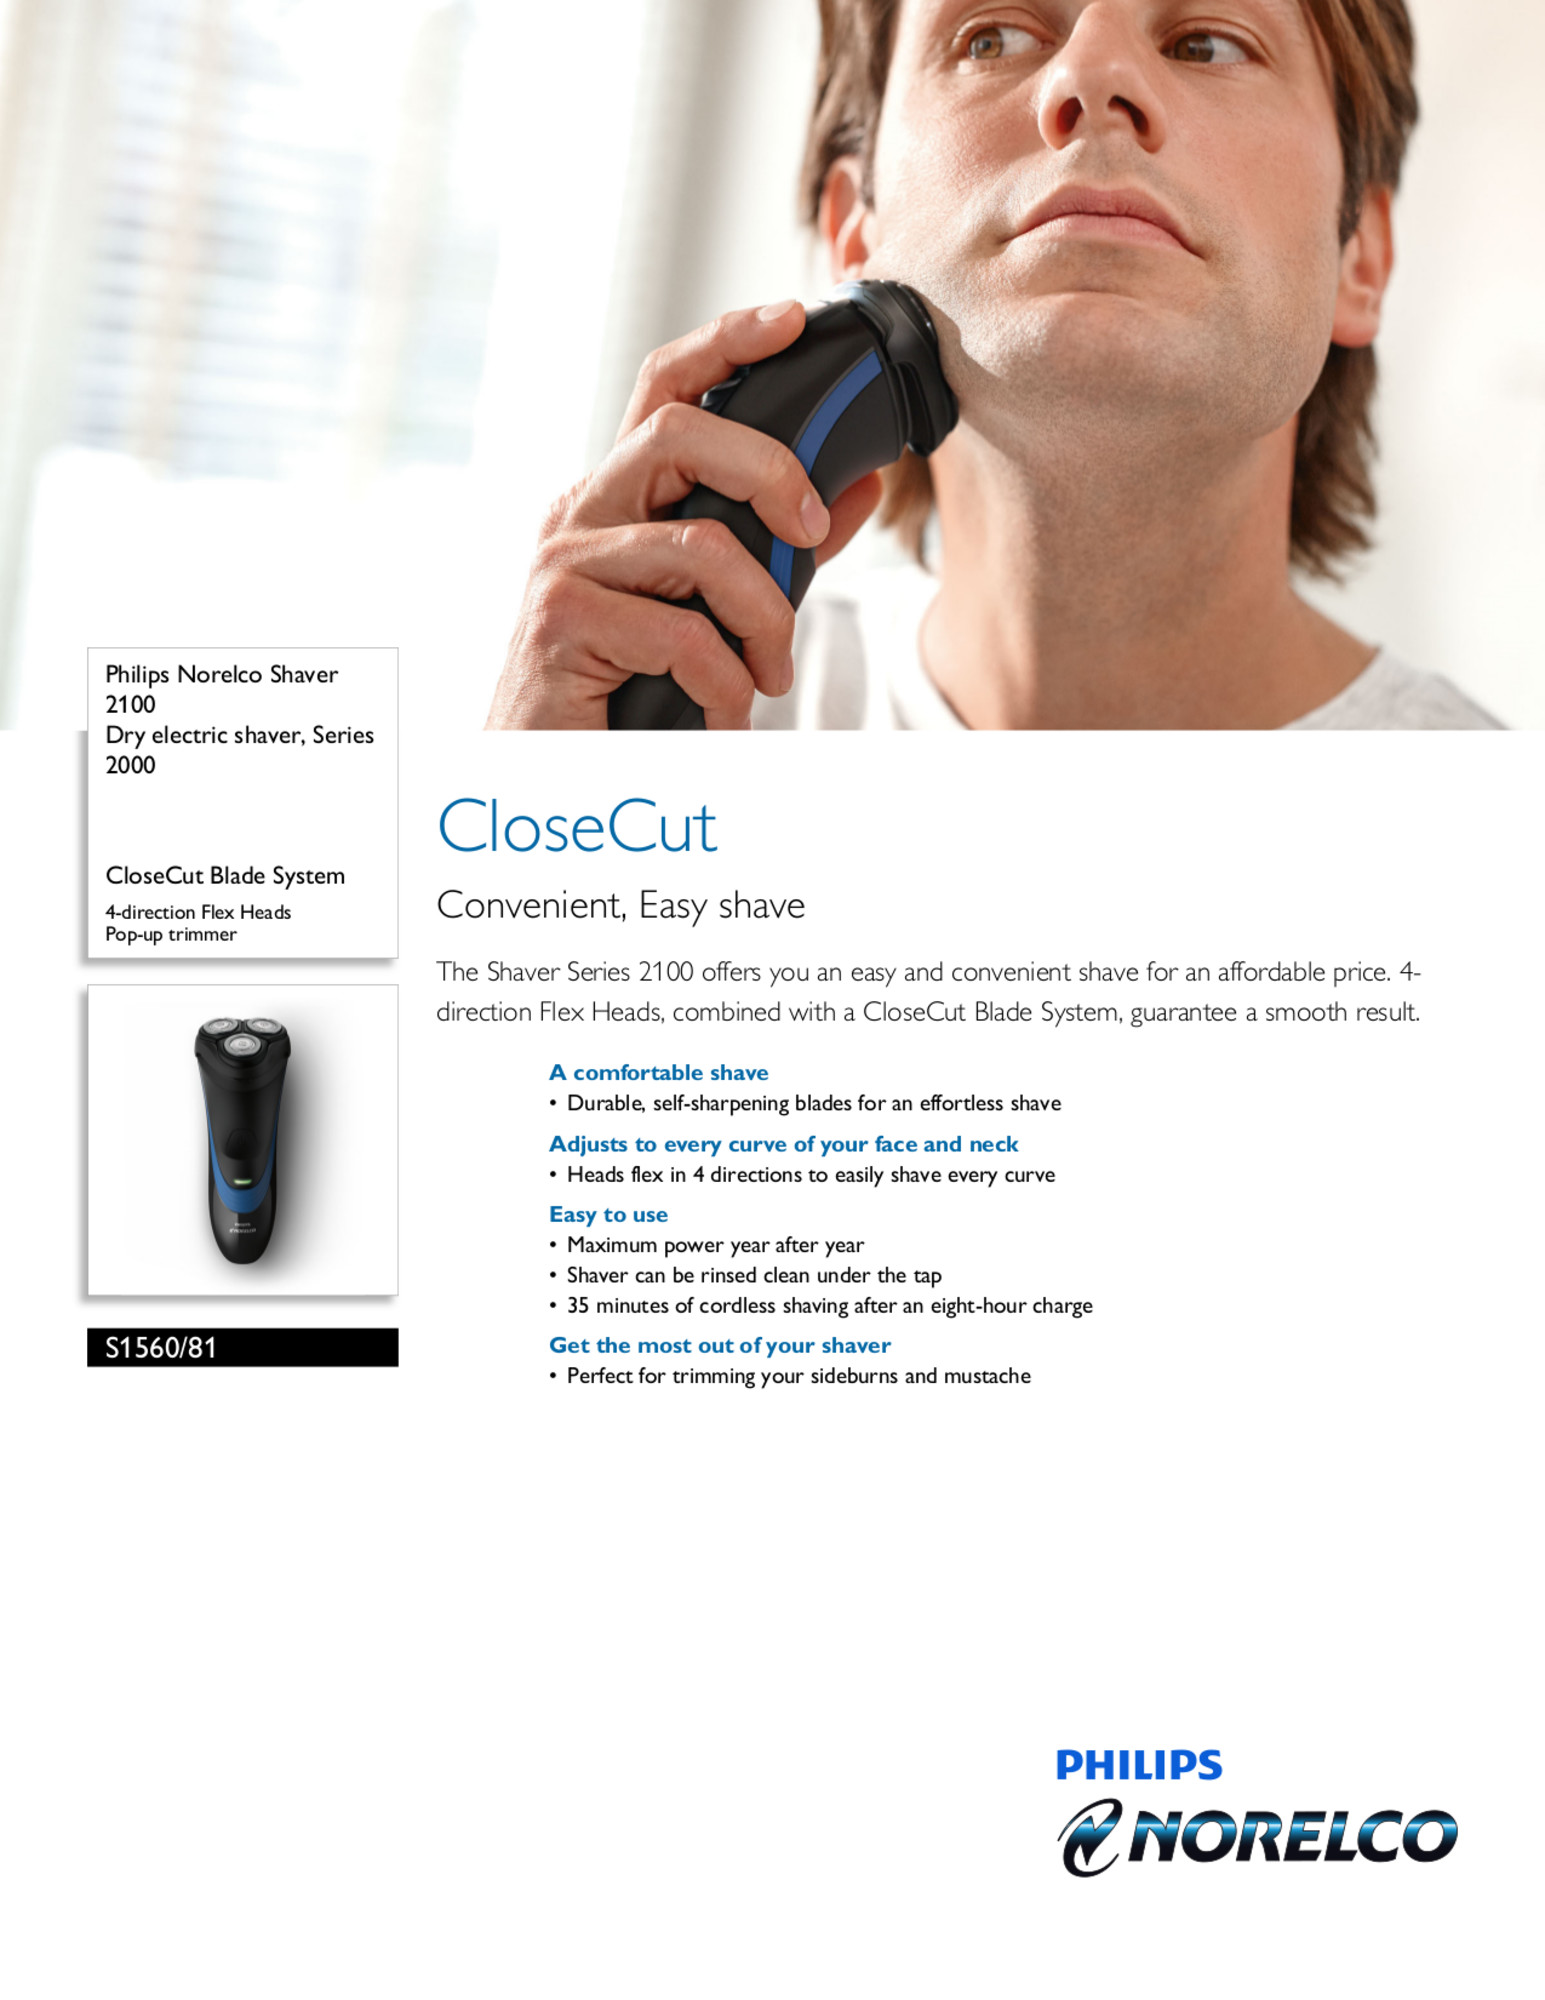 Philips Norelco Series 2000 Electric Shaver 2100, S1560/81 - image 2 of 4